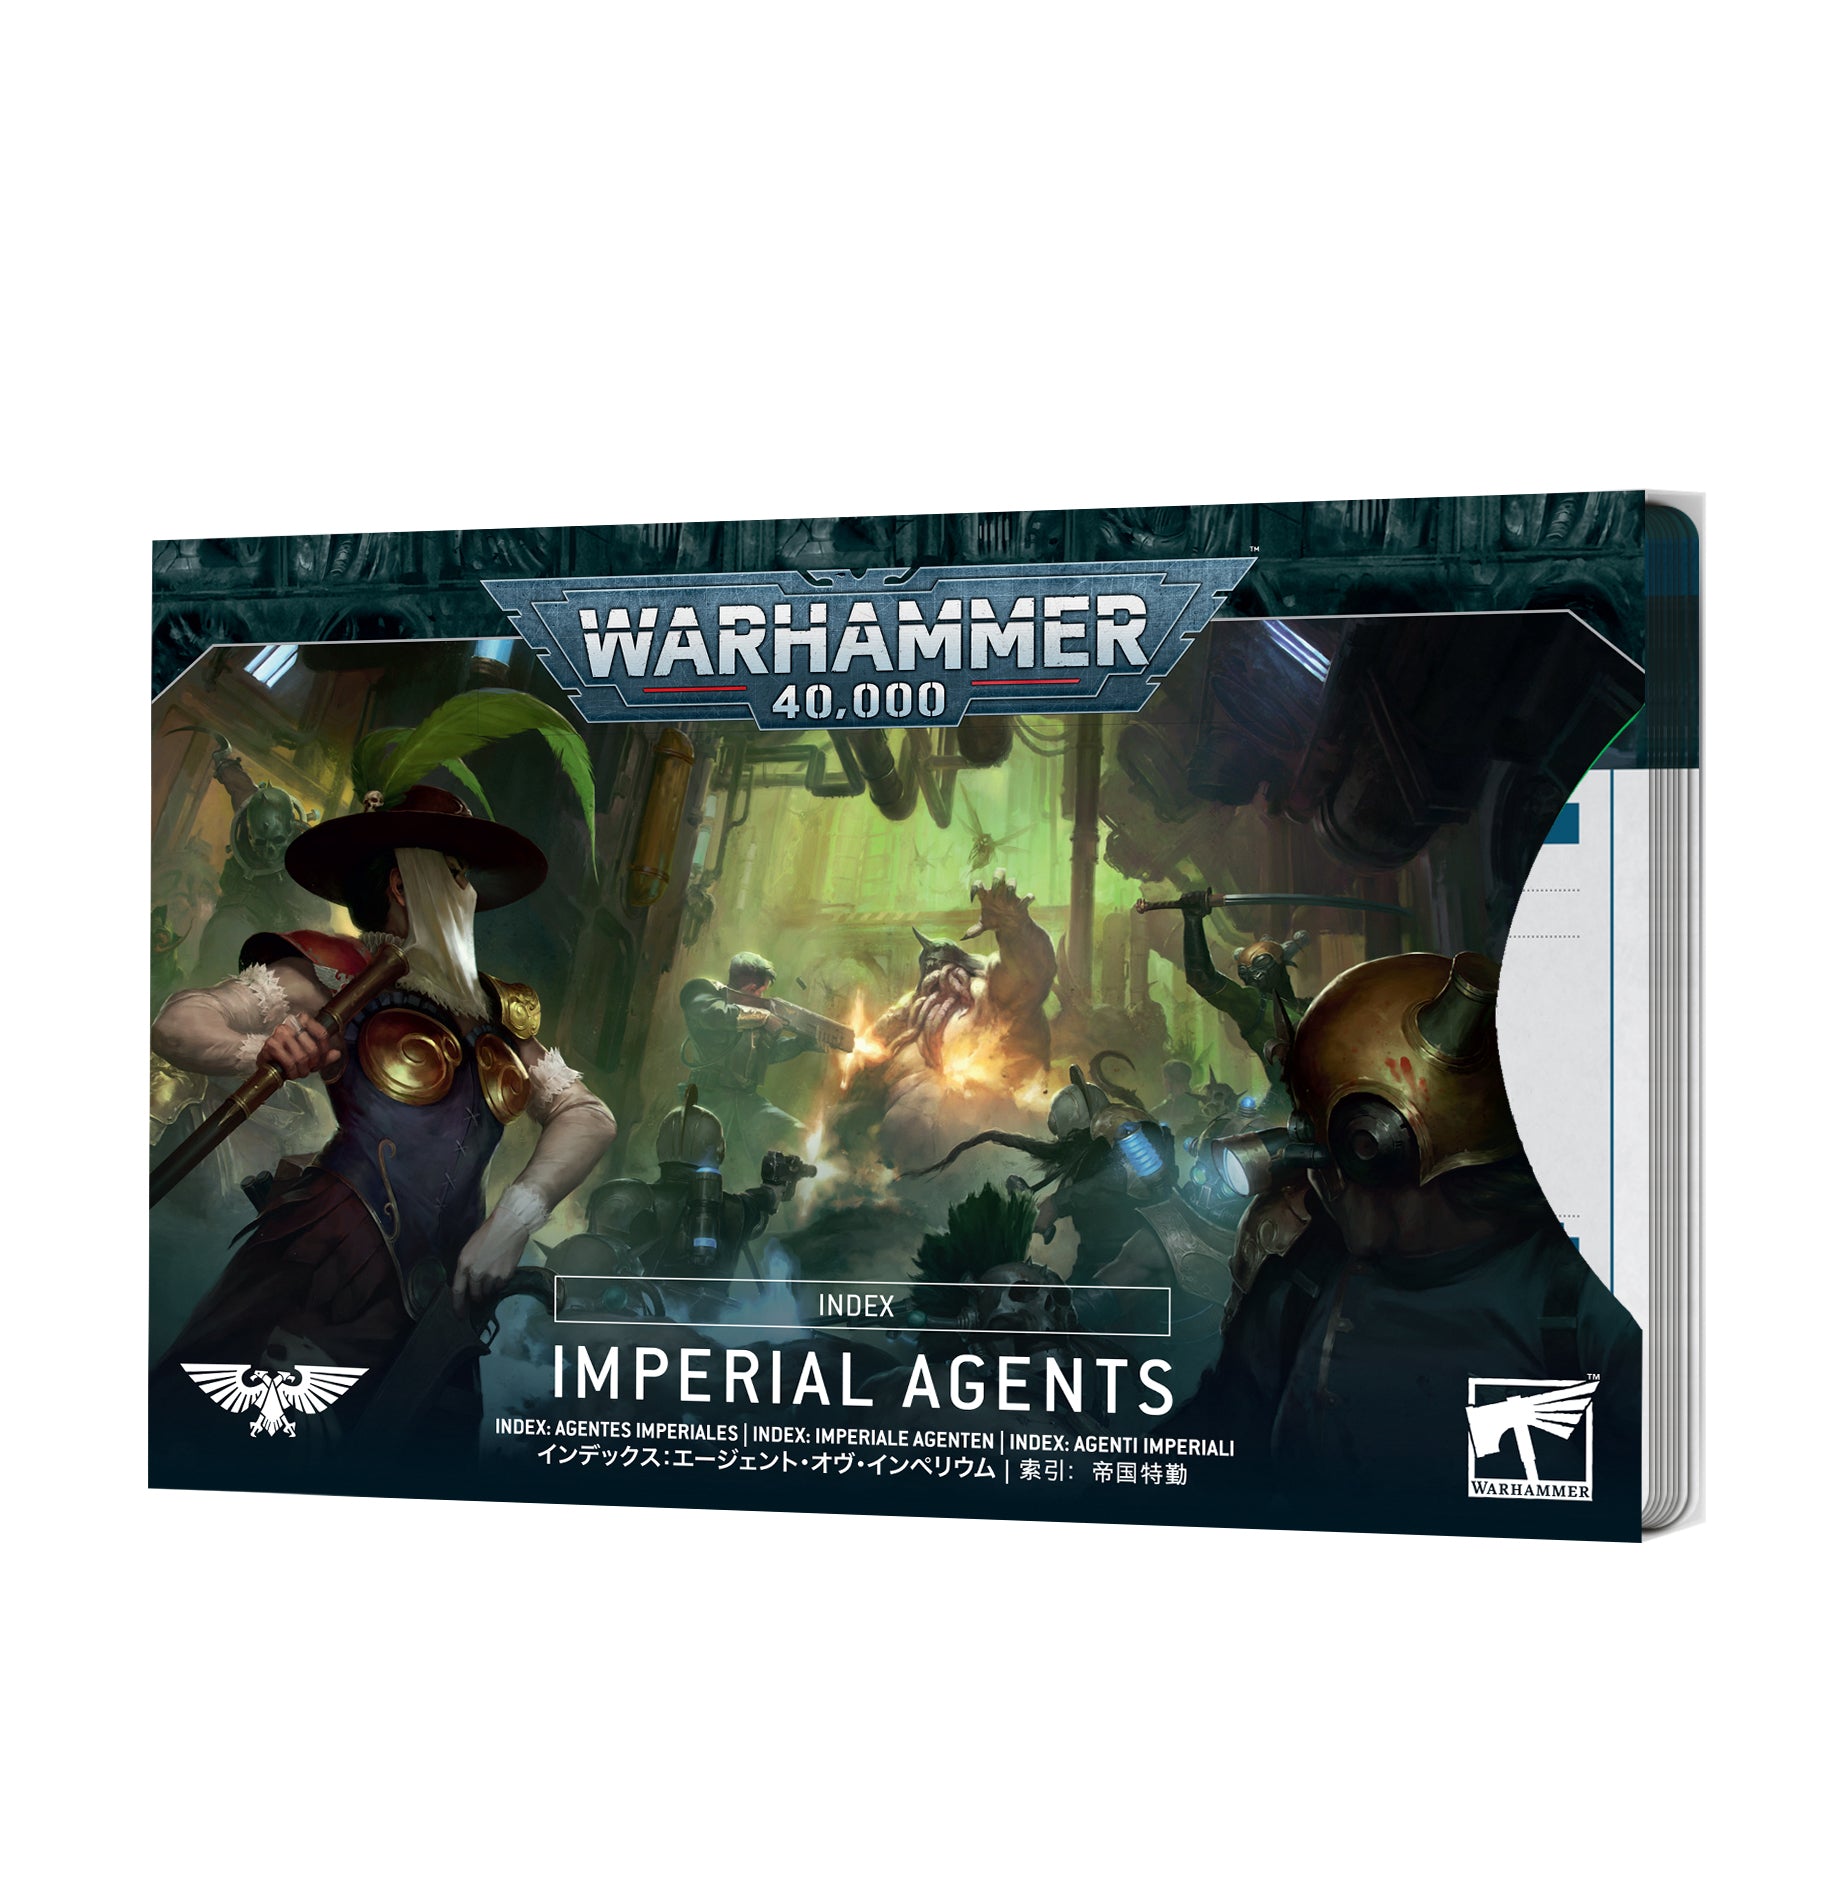 Warhammer 40,000 Index - Imperial Agents